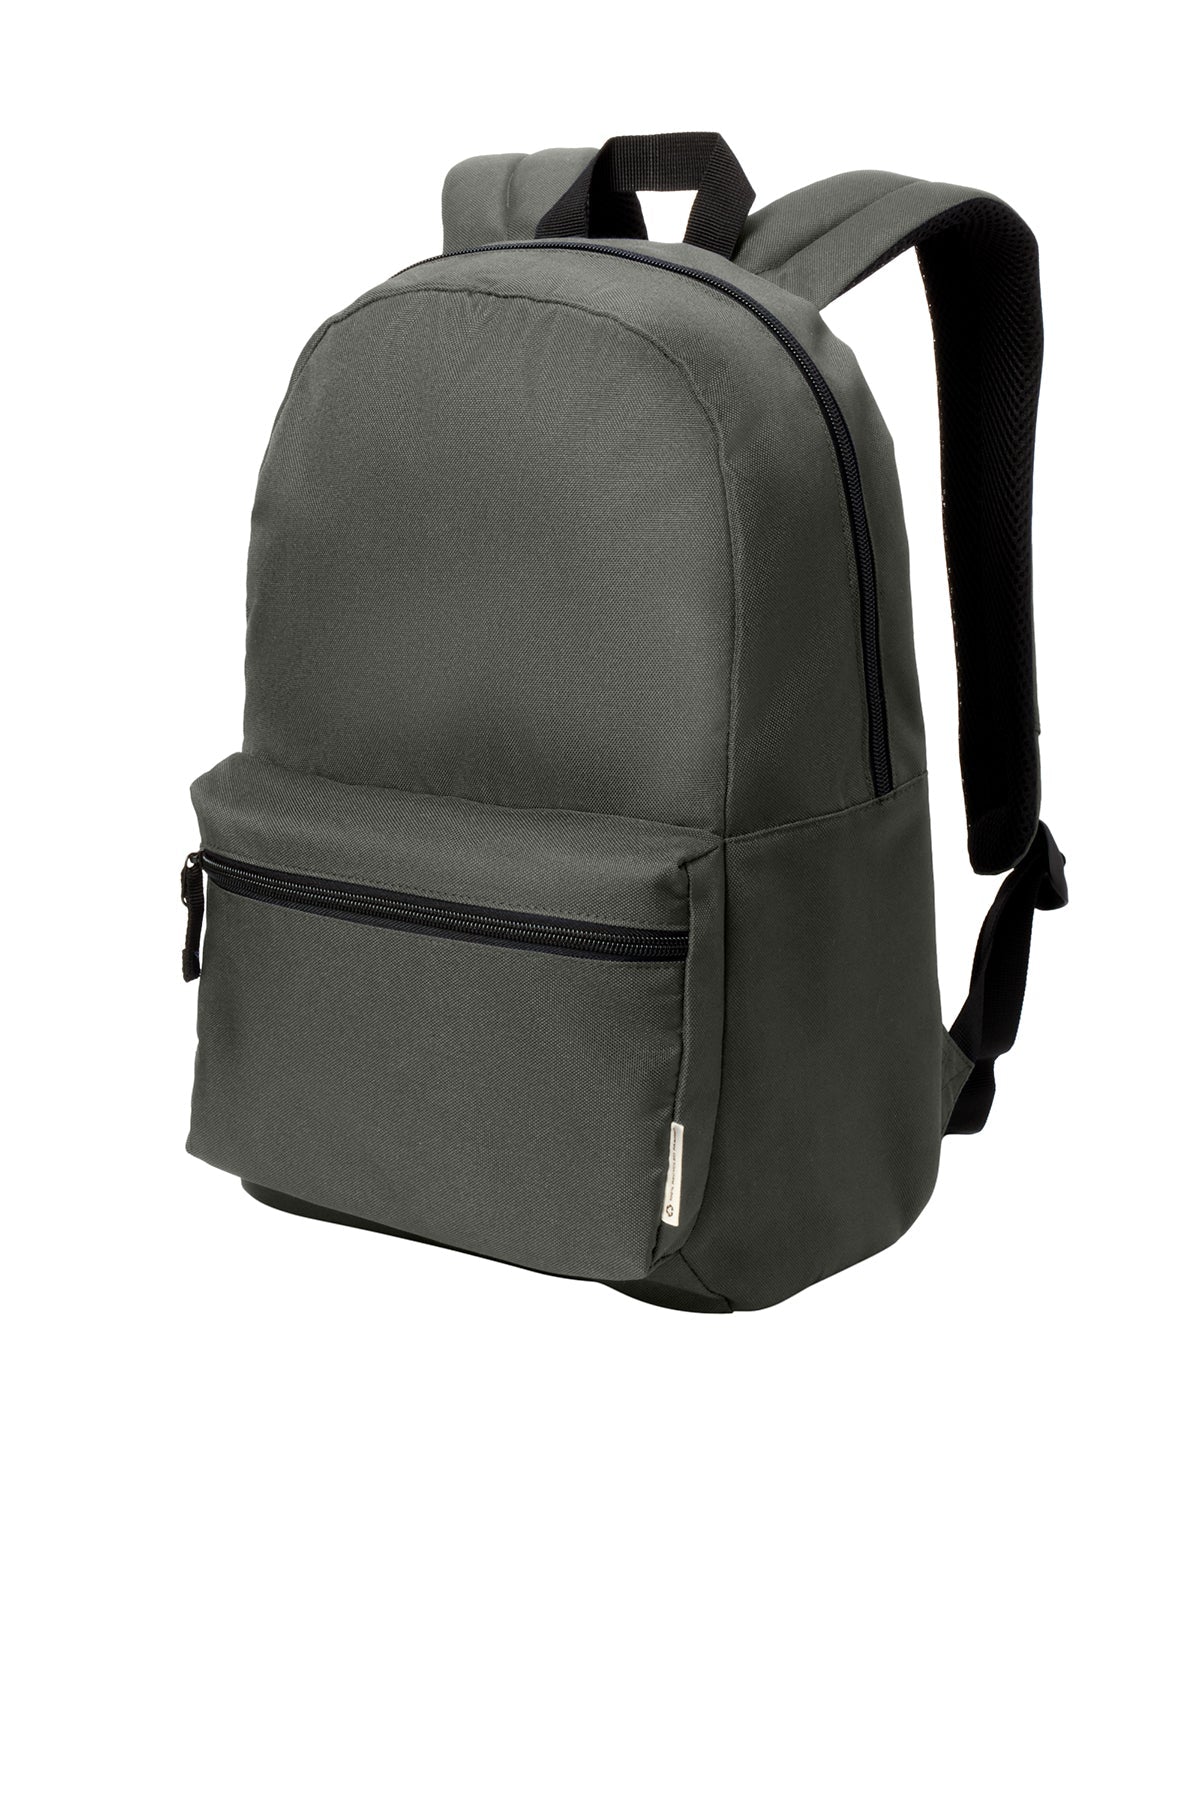 Port Authority C-Free Recycled Customized Backpacks, Grey Steel